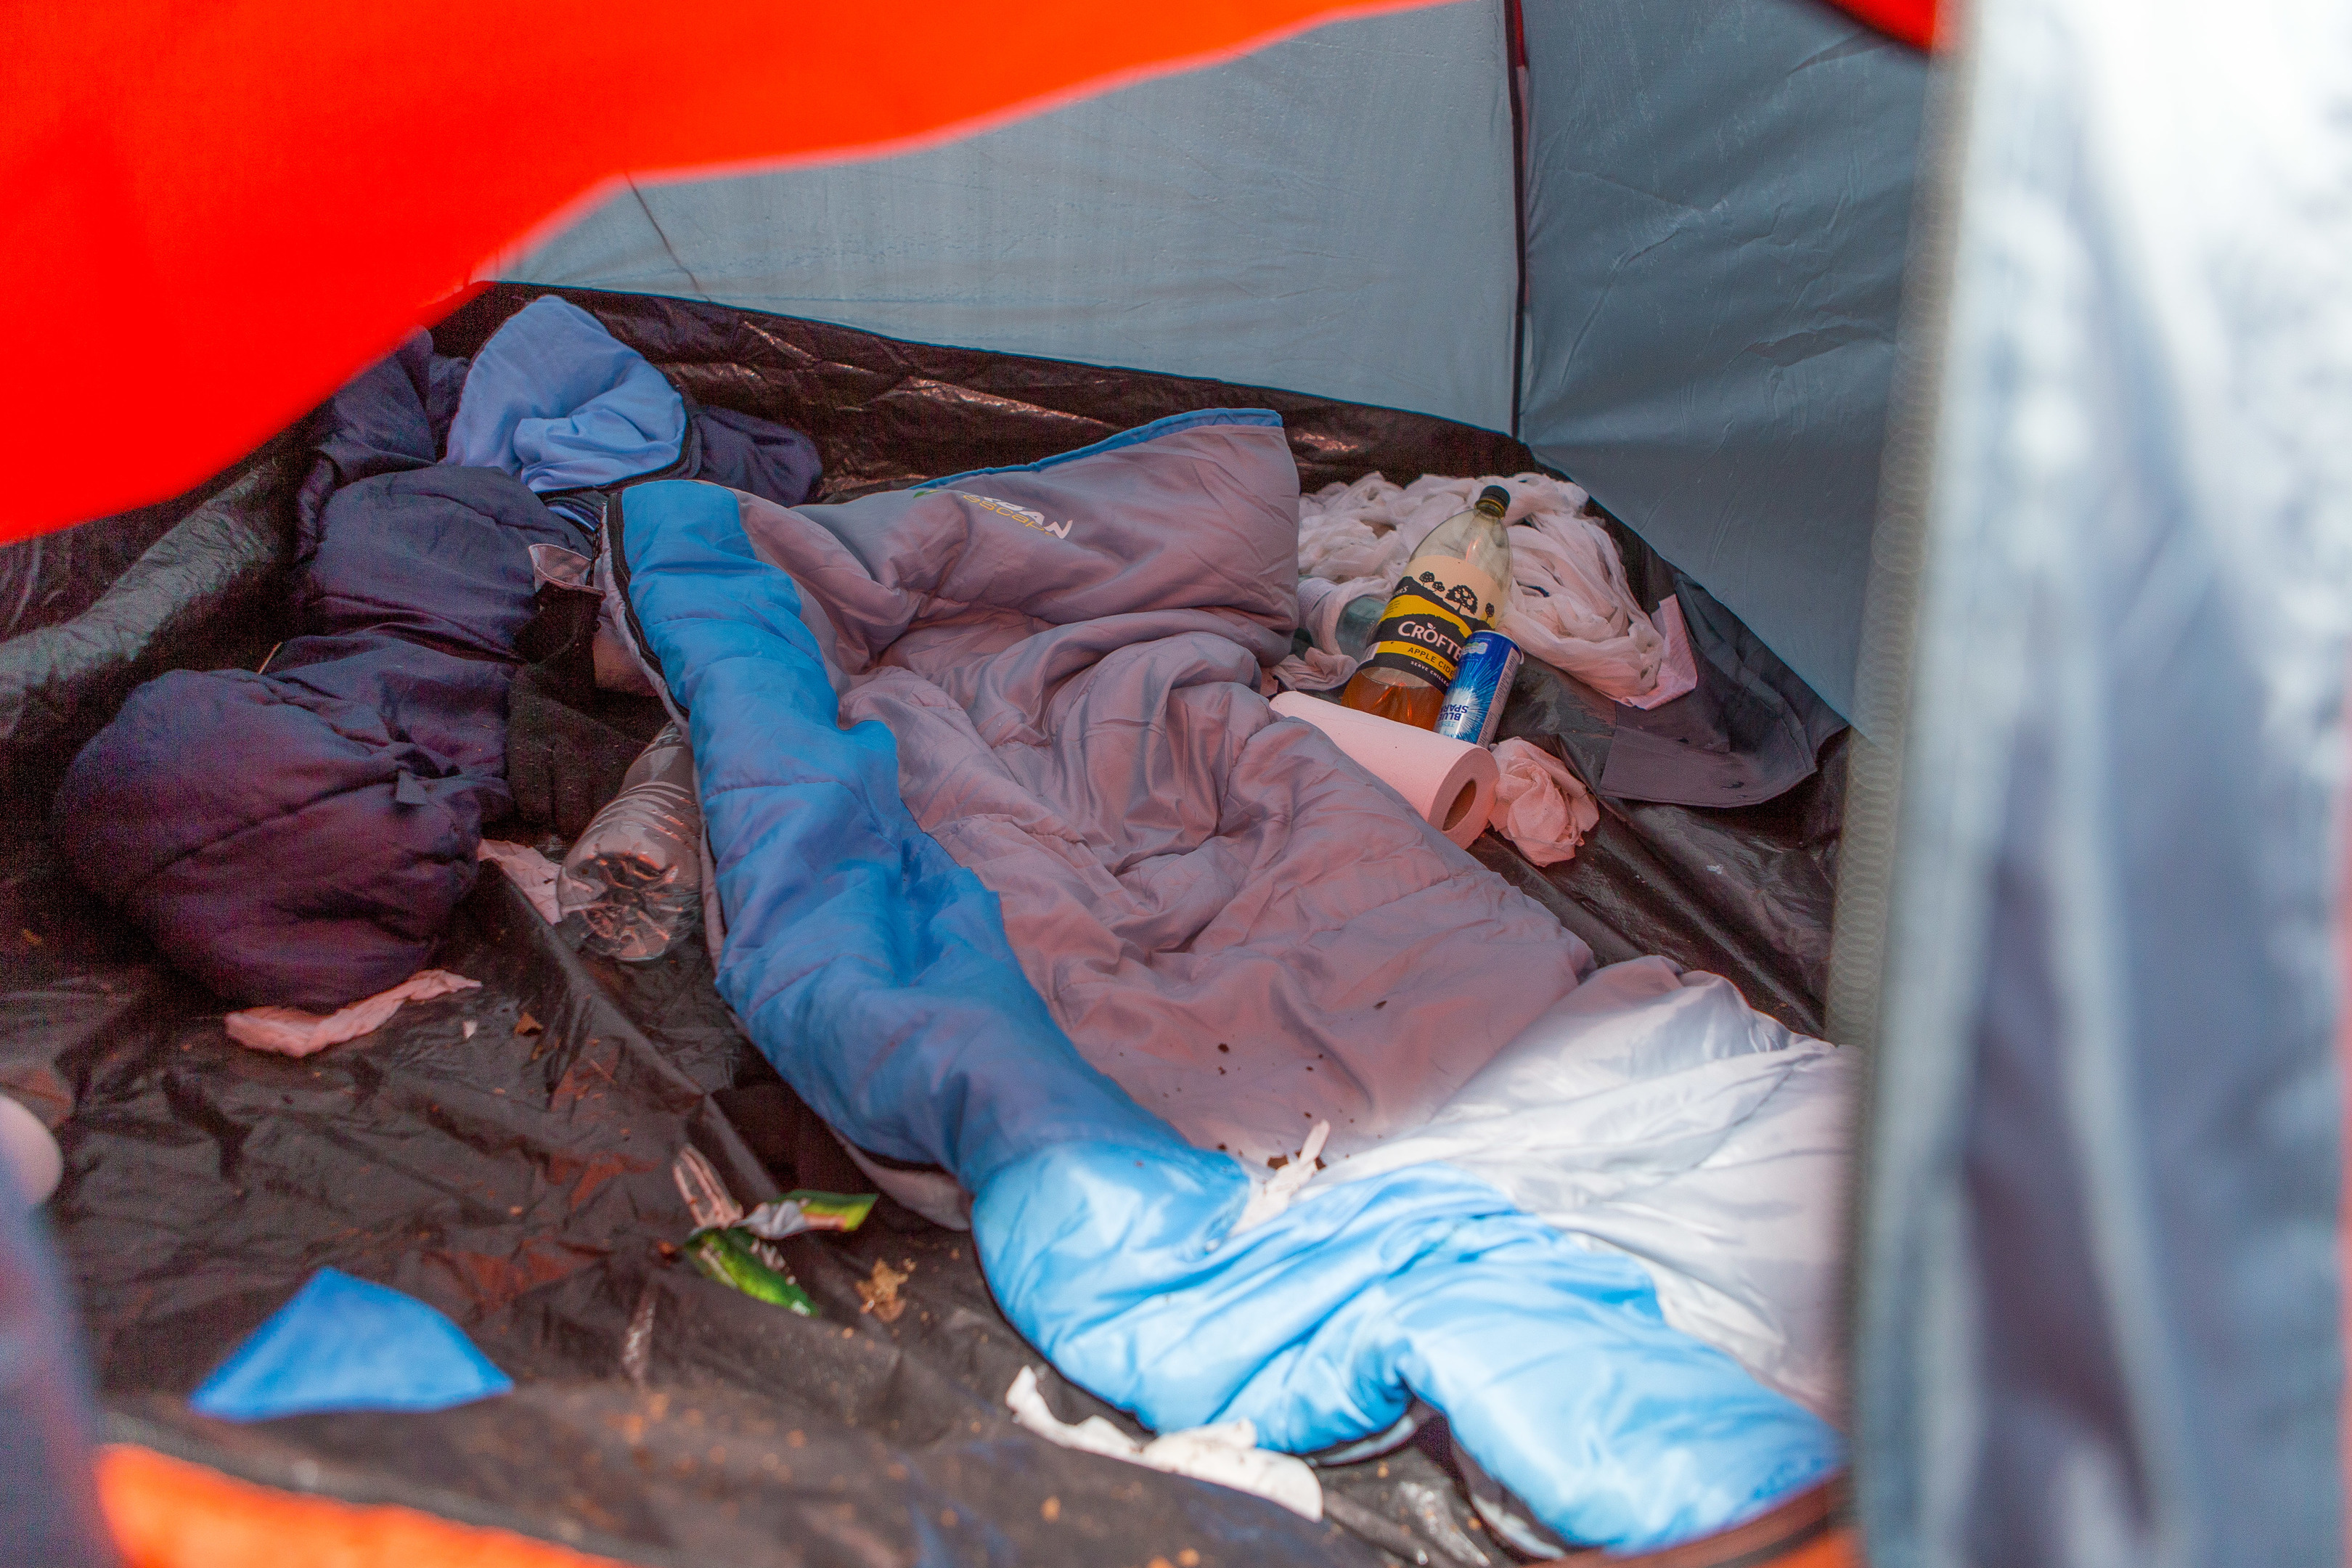 An abandoned tent gives a glimpse of the grim living conditions staff are prepared to endure